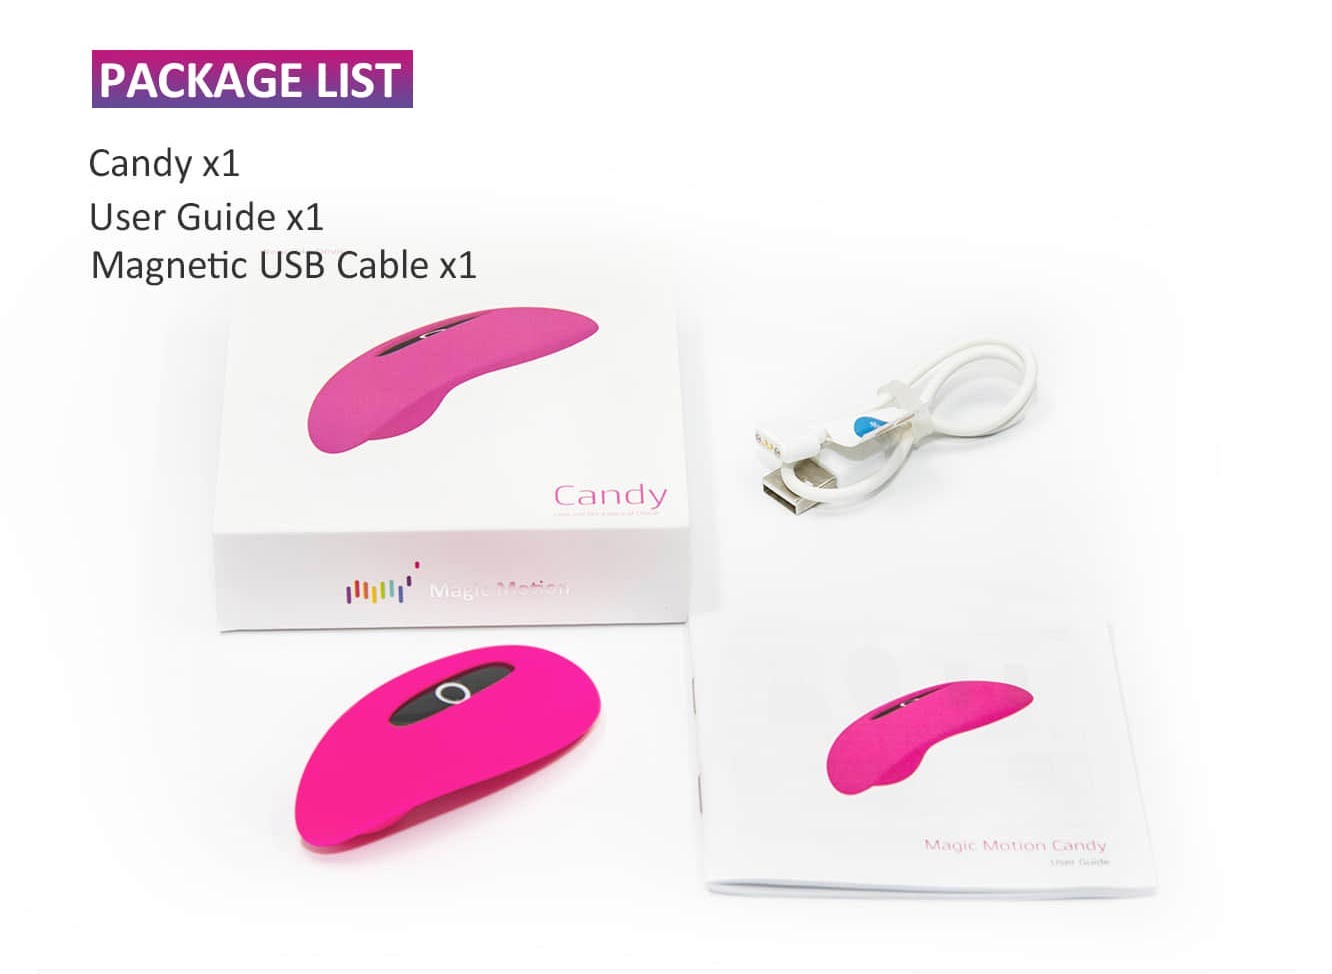 Magic Motion Candy App-controlled Wearable Vibe sss